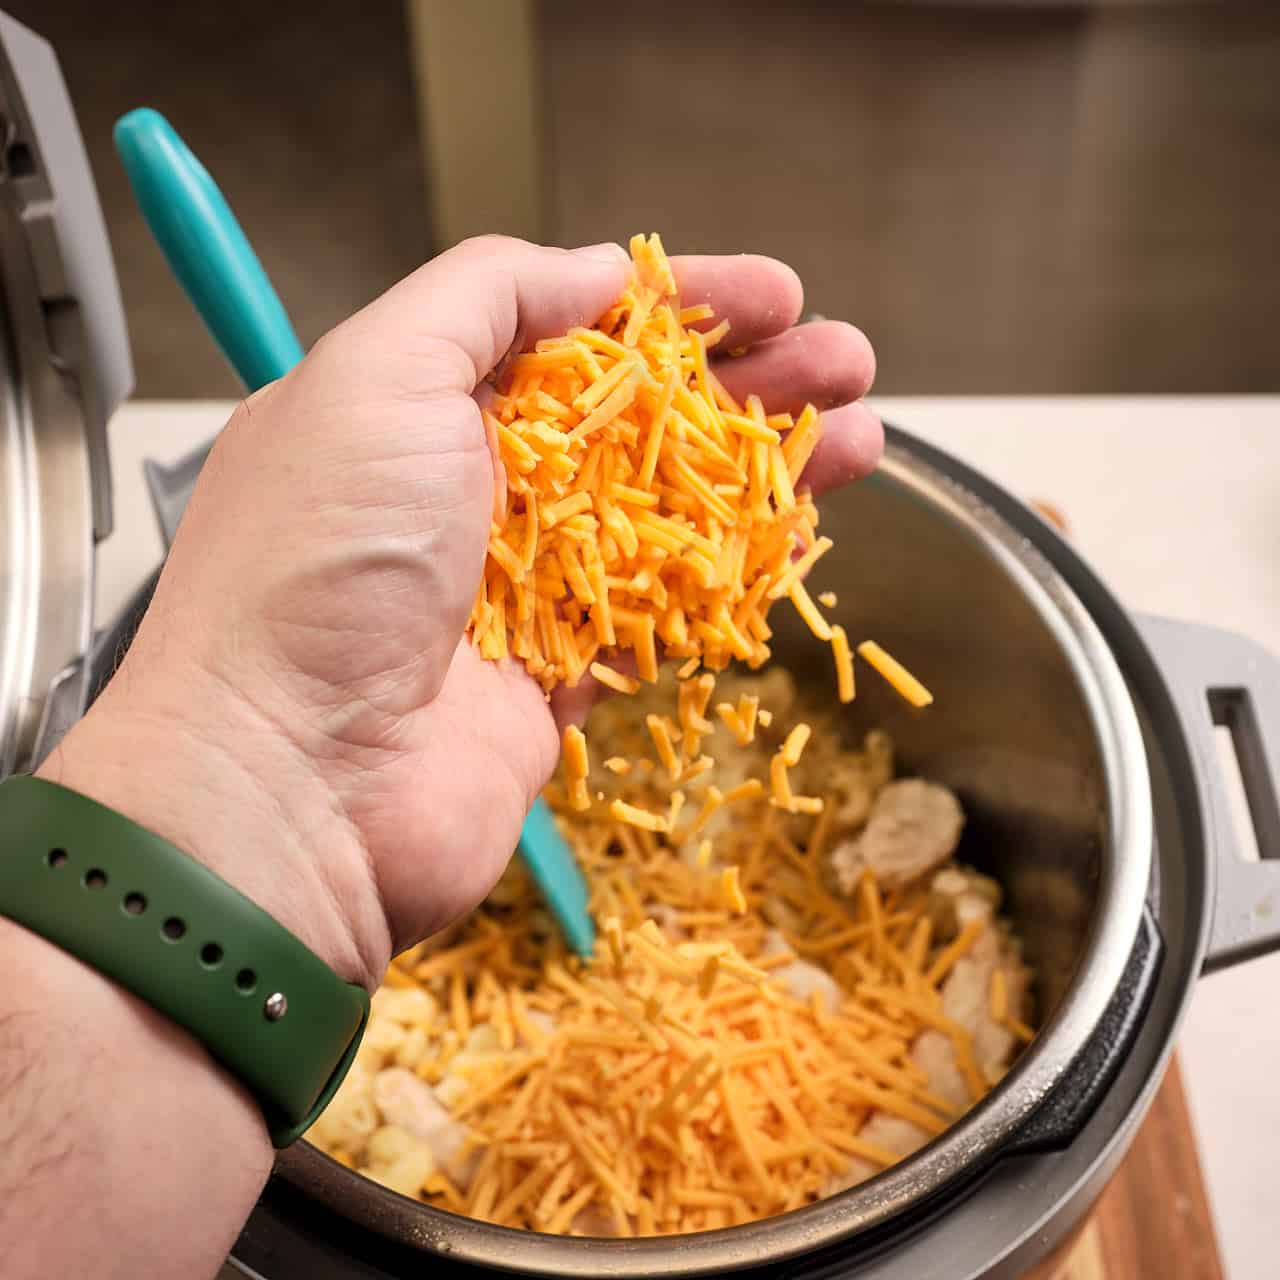 Sprinkling cheese into the pot